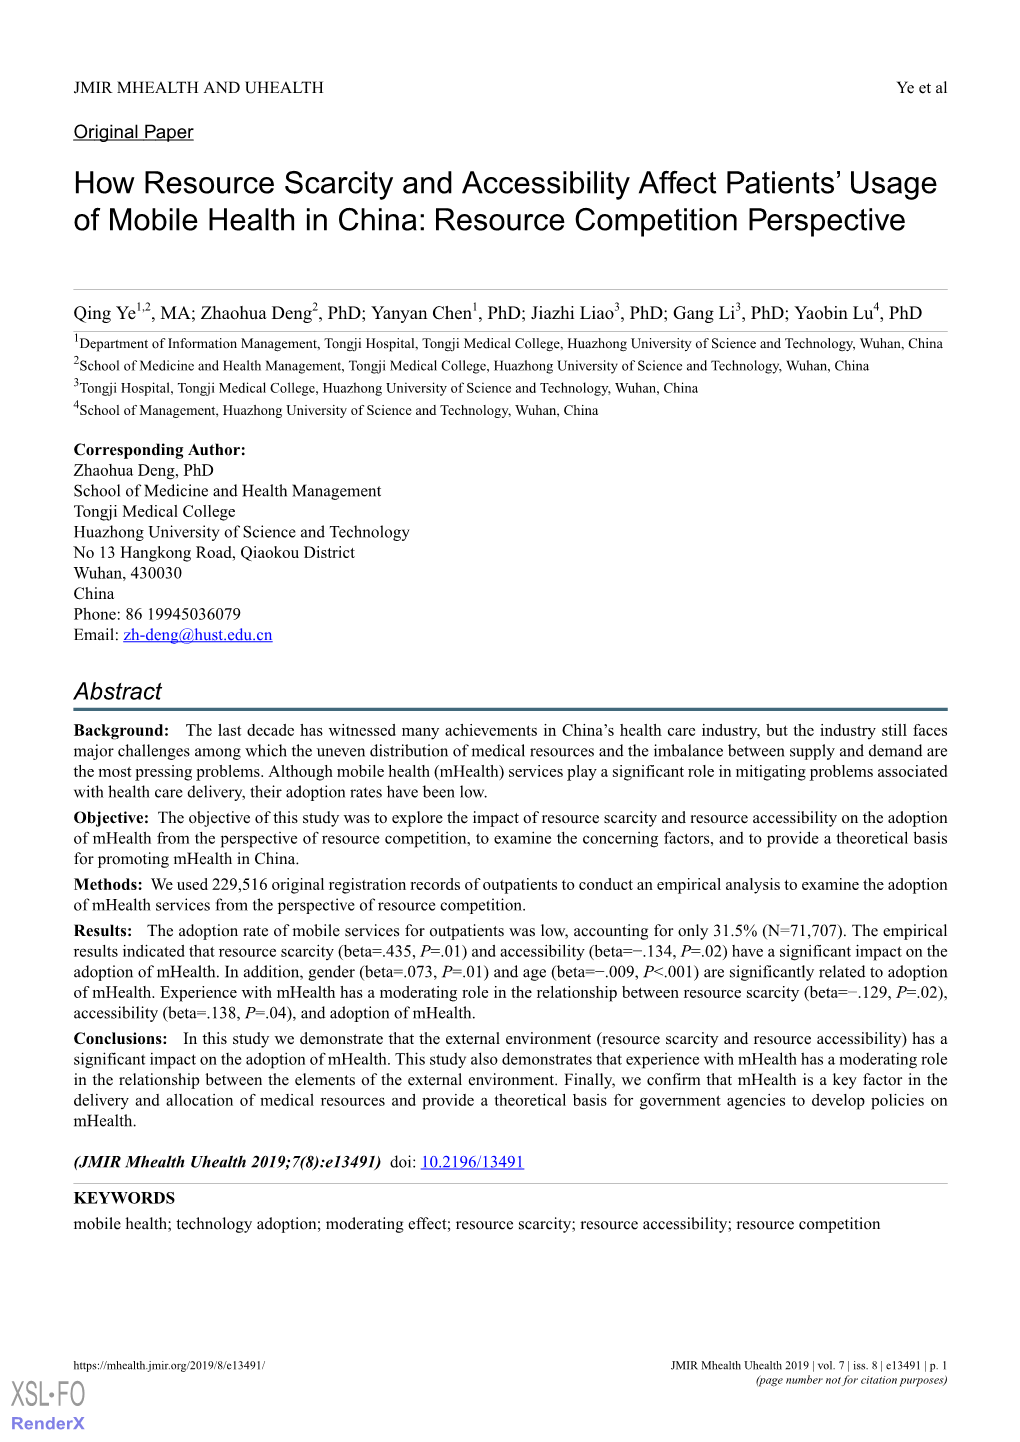 How Resource Scarcity and Accessibility Affect Patients' Usage of Mobile Health in China: Resource Competition Perspective